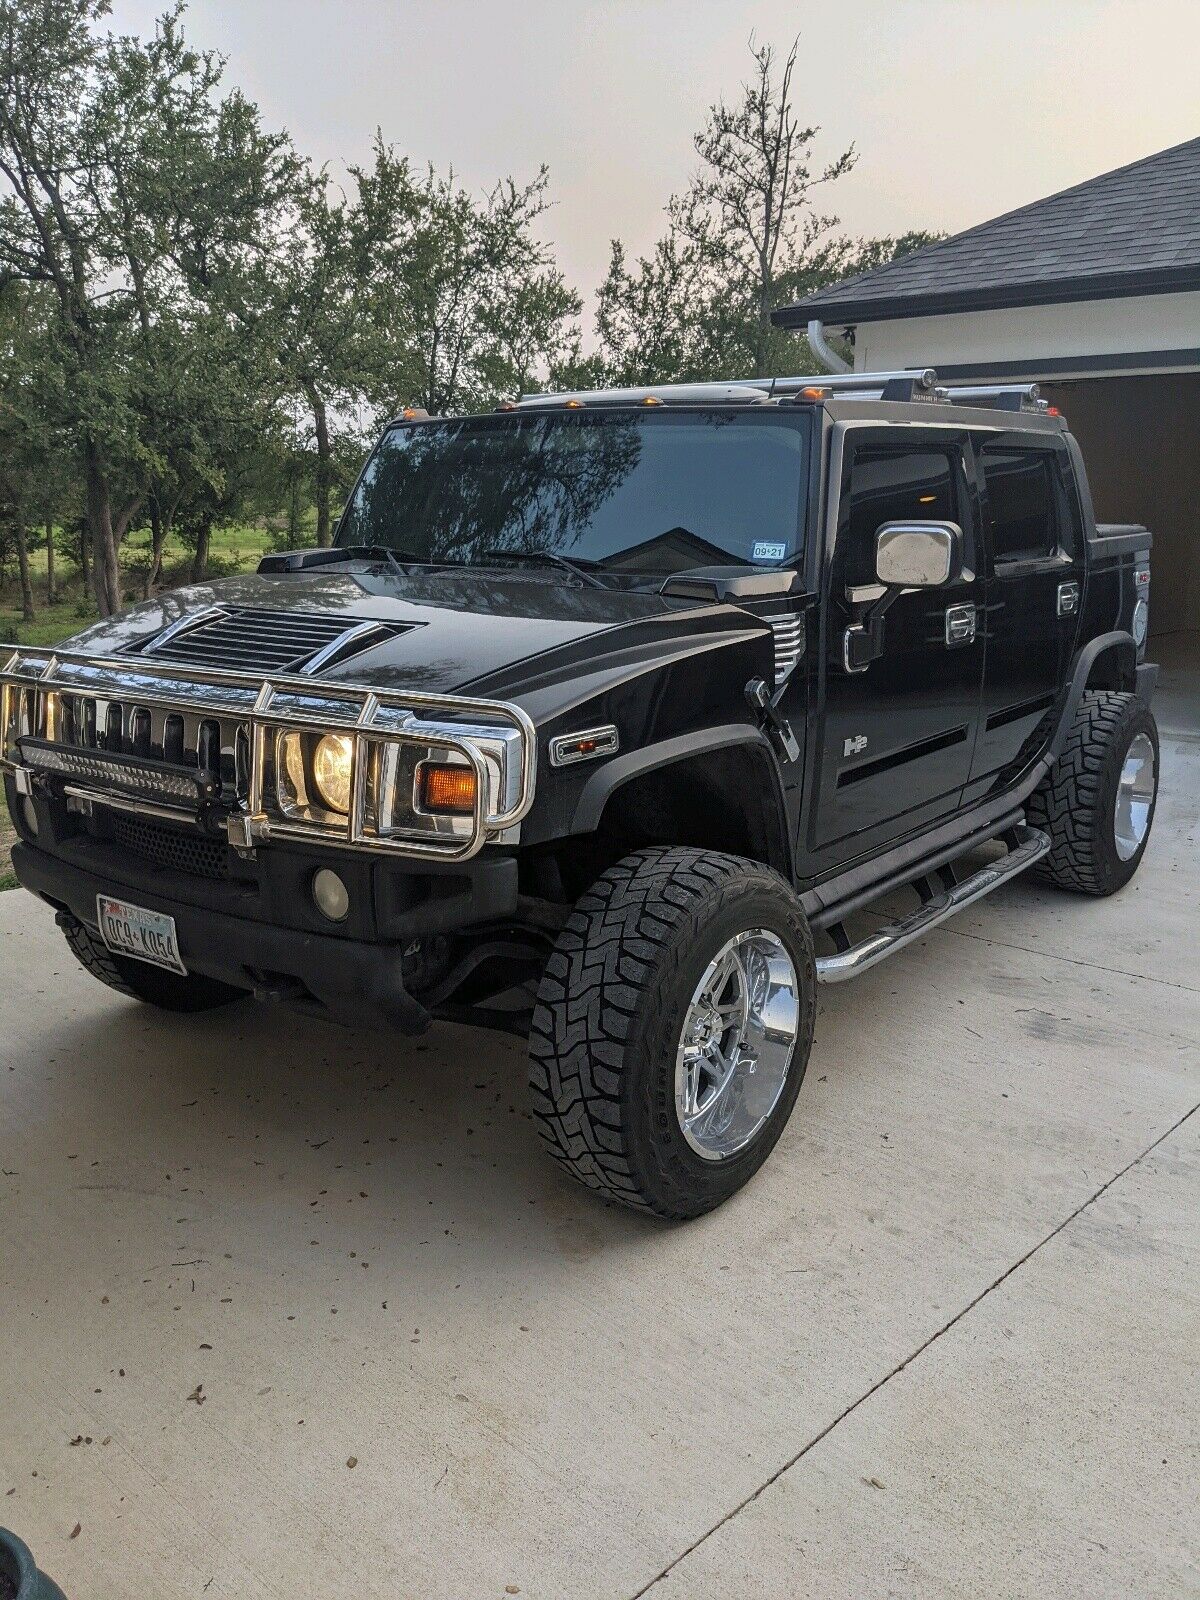 2005 Hummer H2 Sut  2005 Hummer H2 Sut Suv Black 4wd Automatic